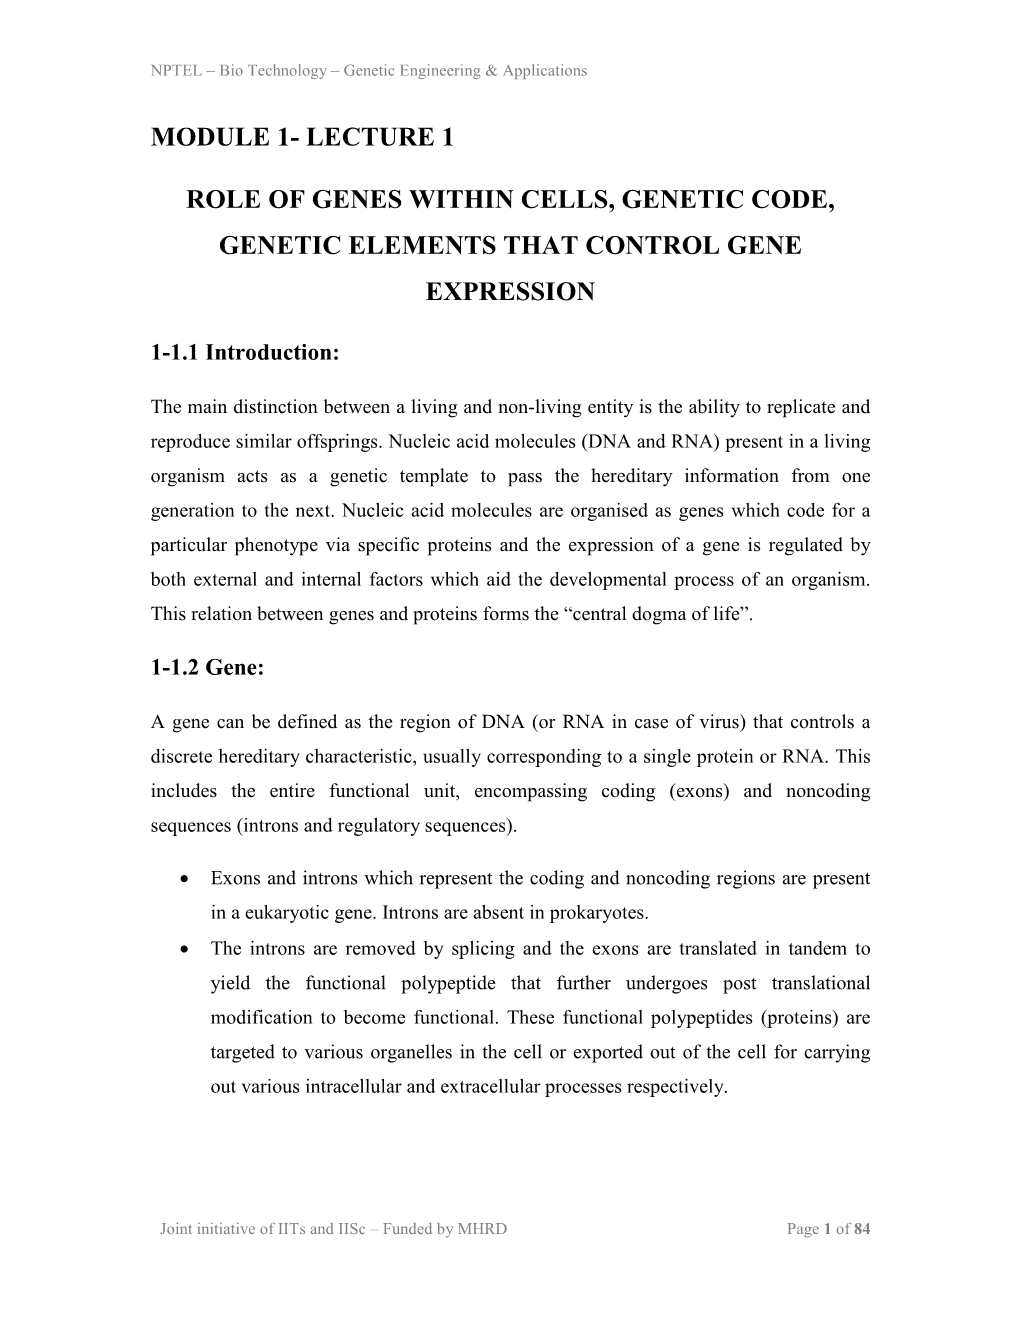 Lecture 1 Role of Genes Within Cells, Genetic